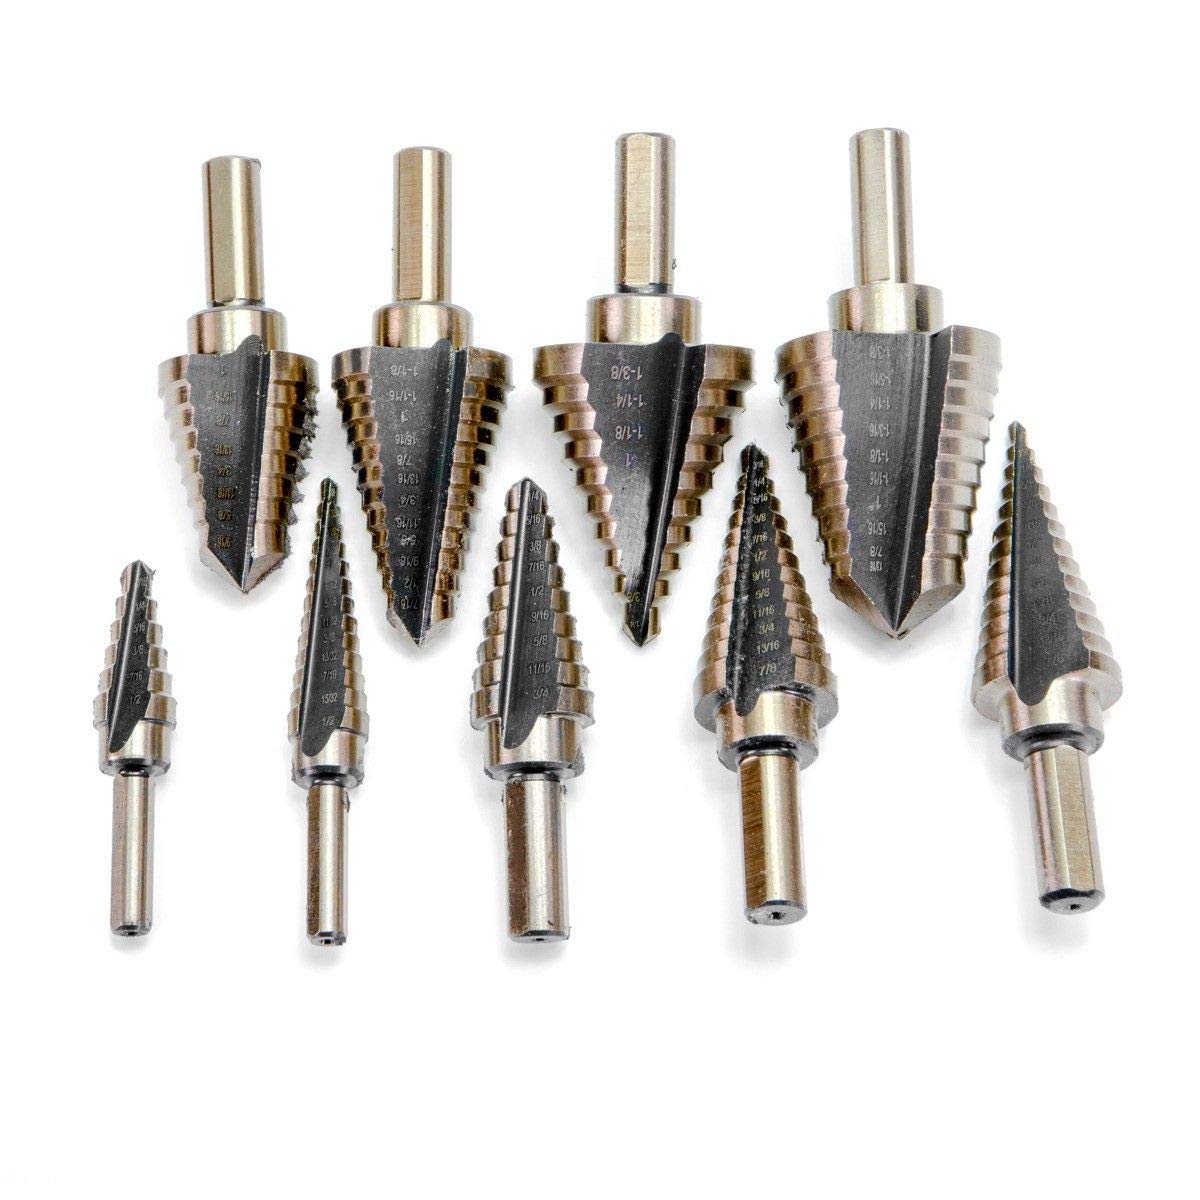 Stark 9-Pieces Step Drill Bit Set Unibit, Titanium Coated, Double Cutting Blades, High Speed Steel, Short Length Drill Bits With Case